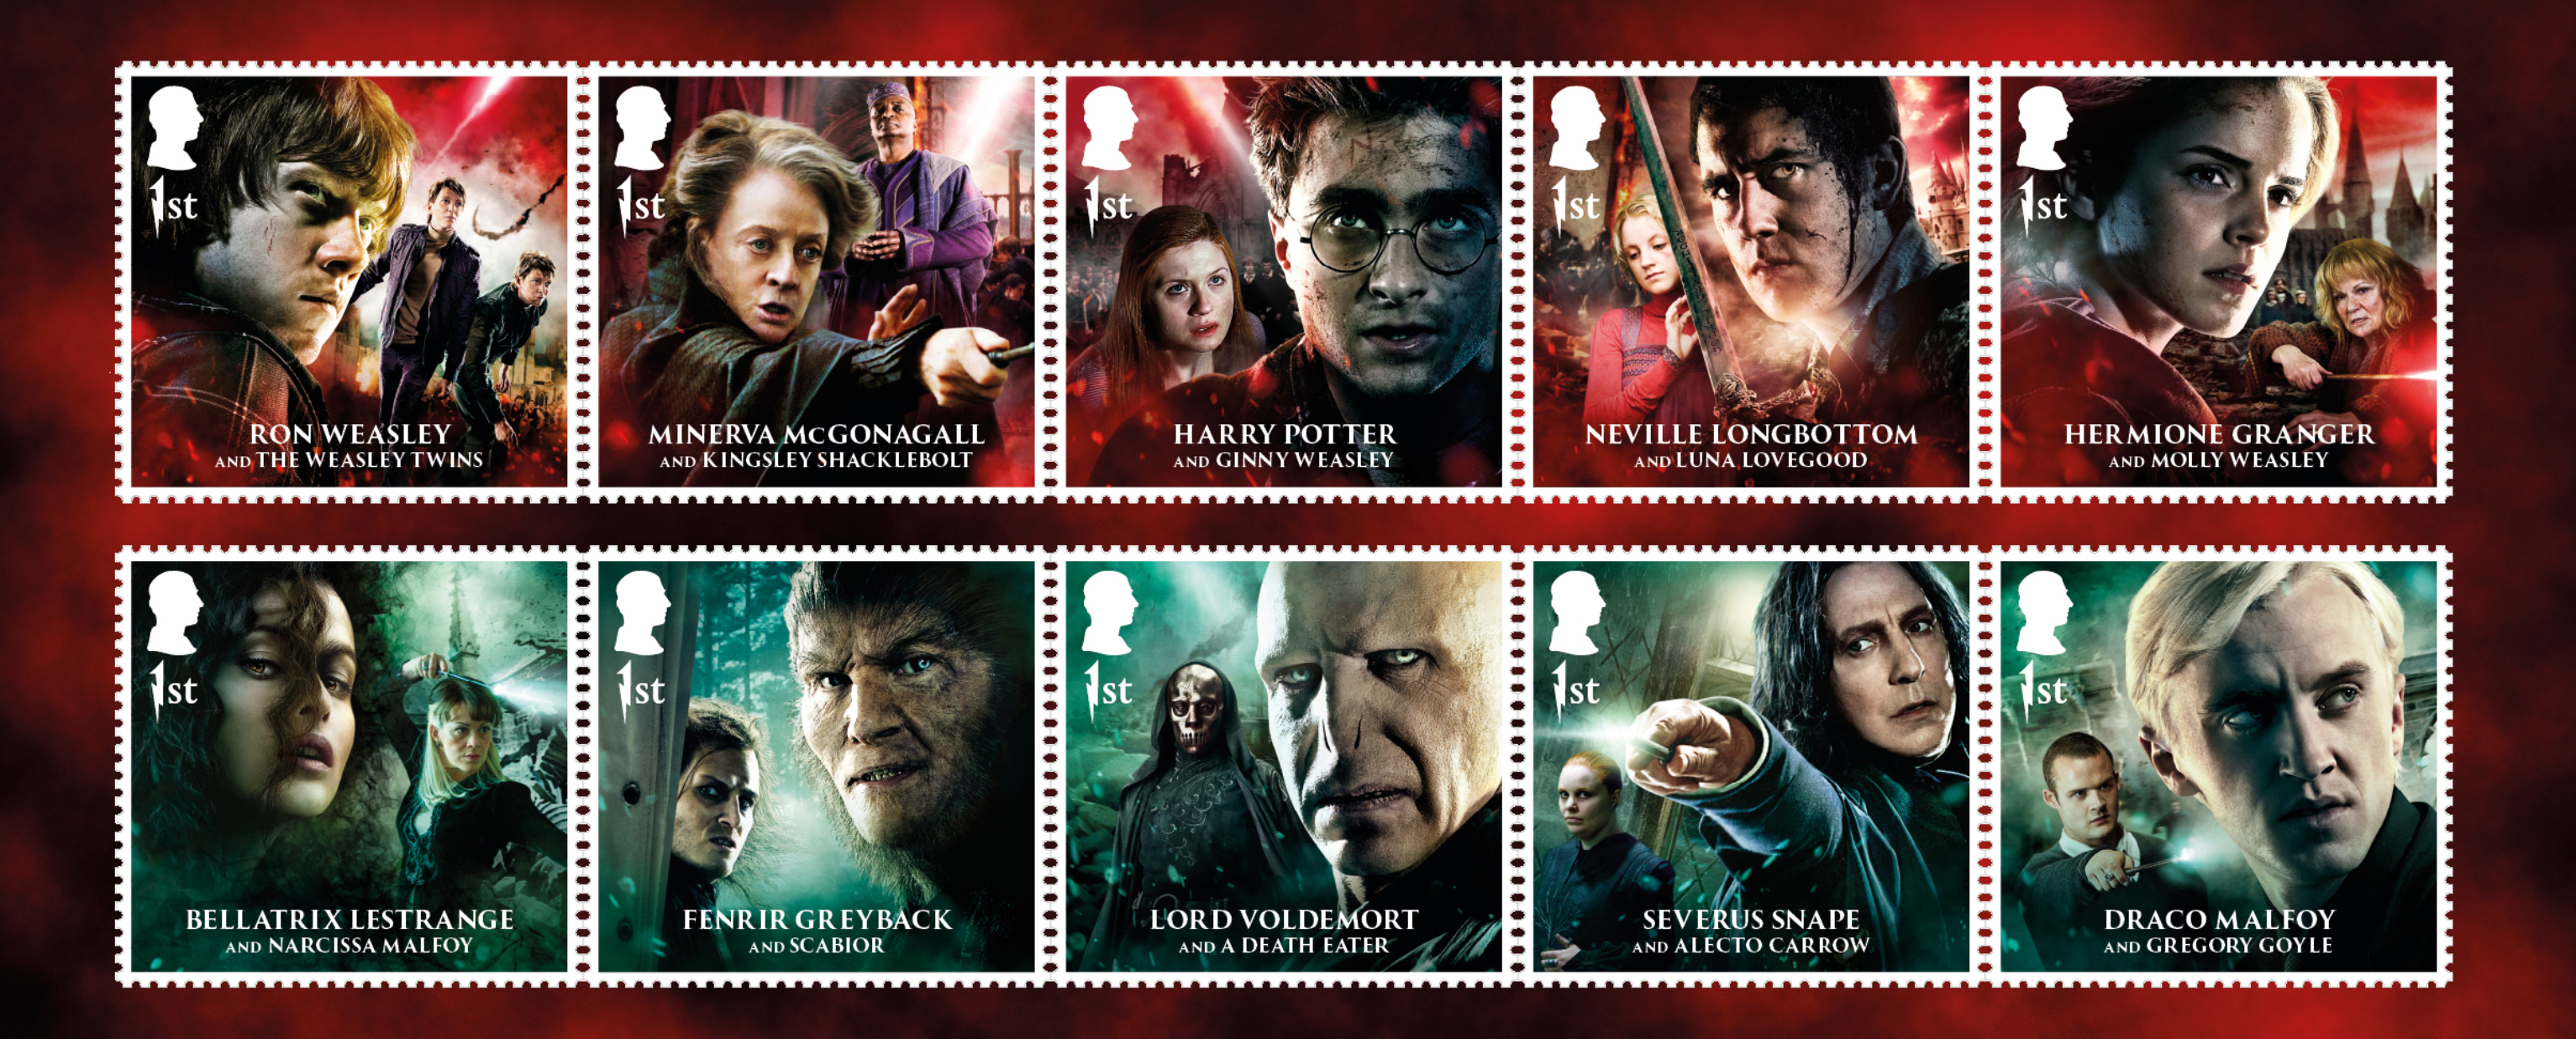 Harry Potter honoured in new set of stamps